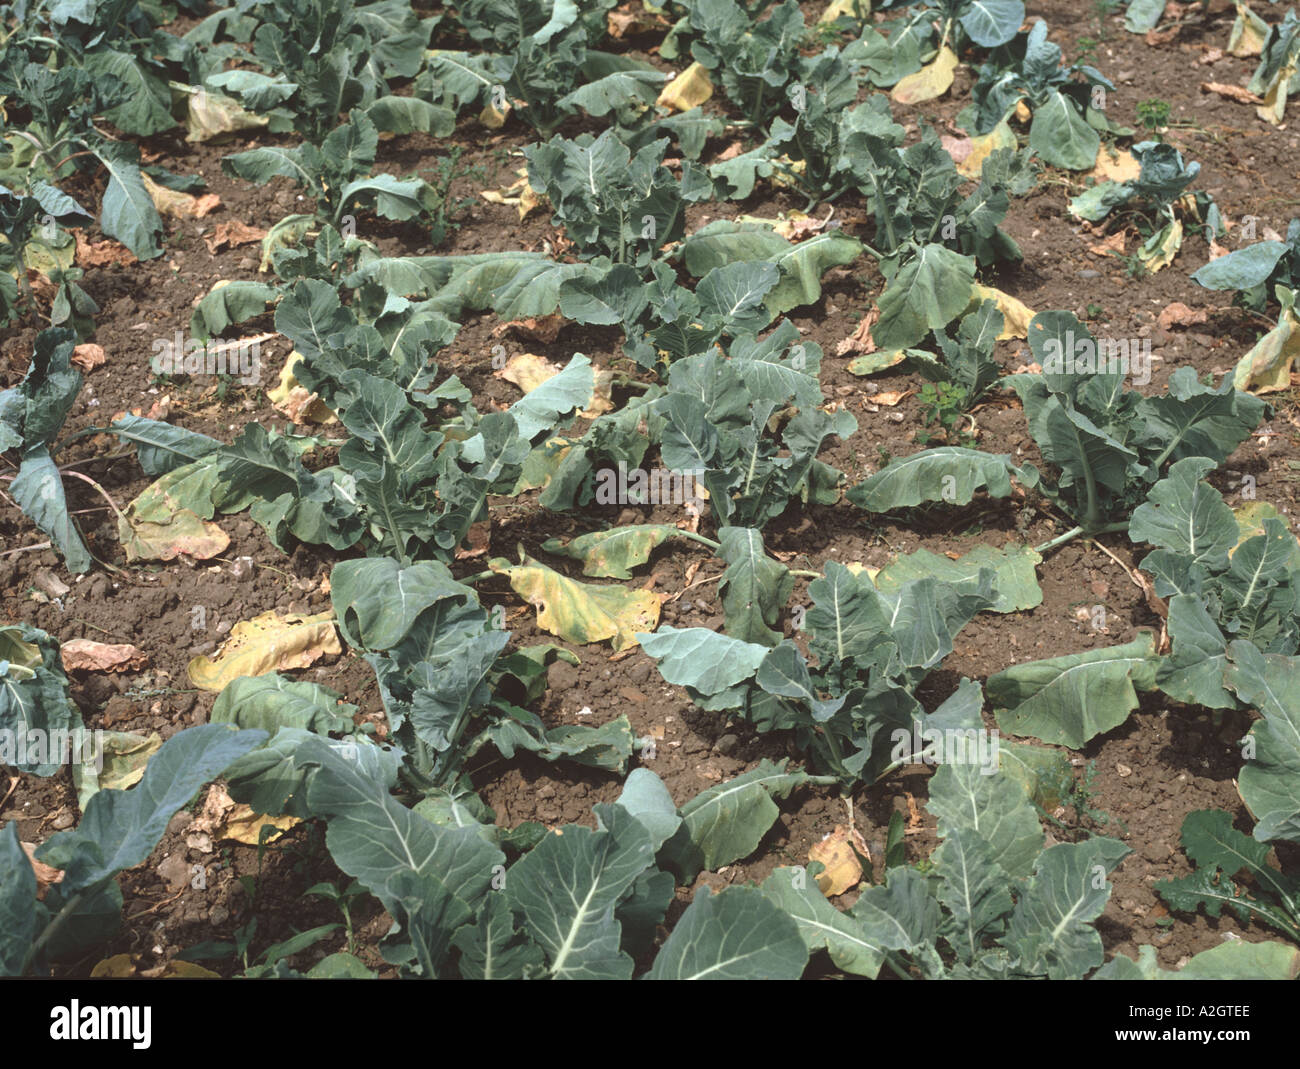 Brassica plants brussels sprouts dying because of clubroot Plasmodiophora brassicae infection on the roots Stock Photo